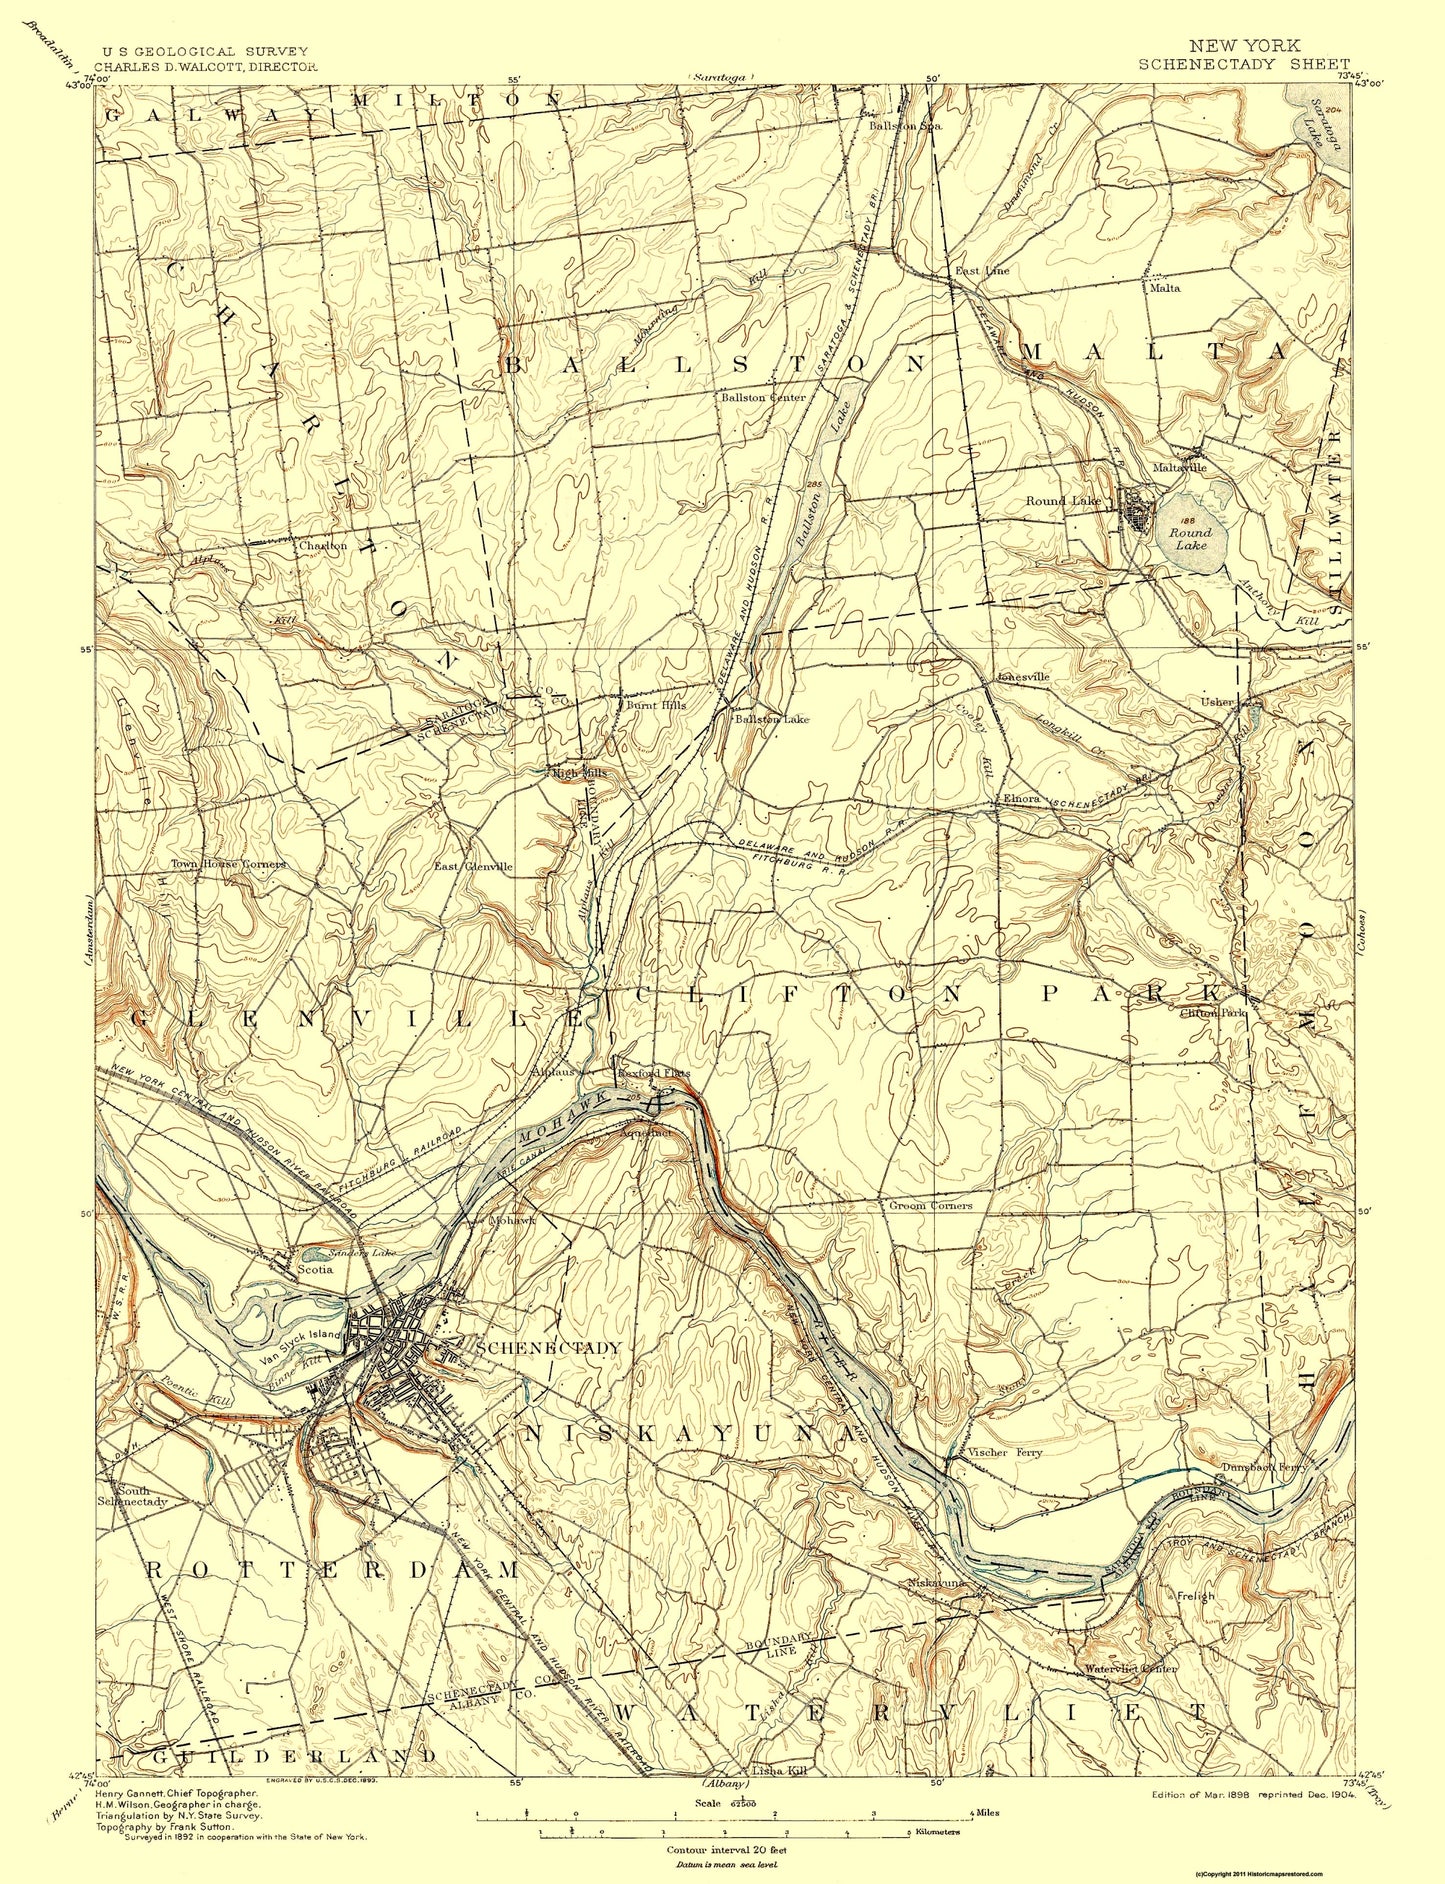 Topographical Map - Schenectady New York Quad - USGS 1898 - 23 x 30.00 - Vintage Wall Art